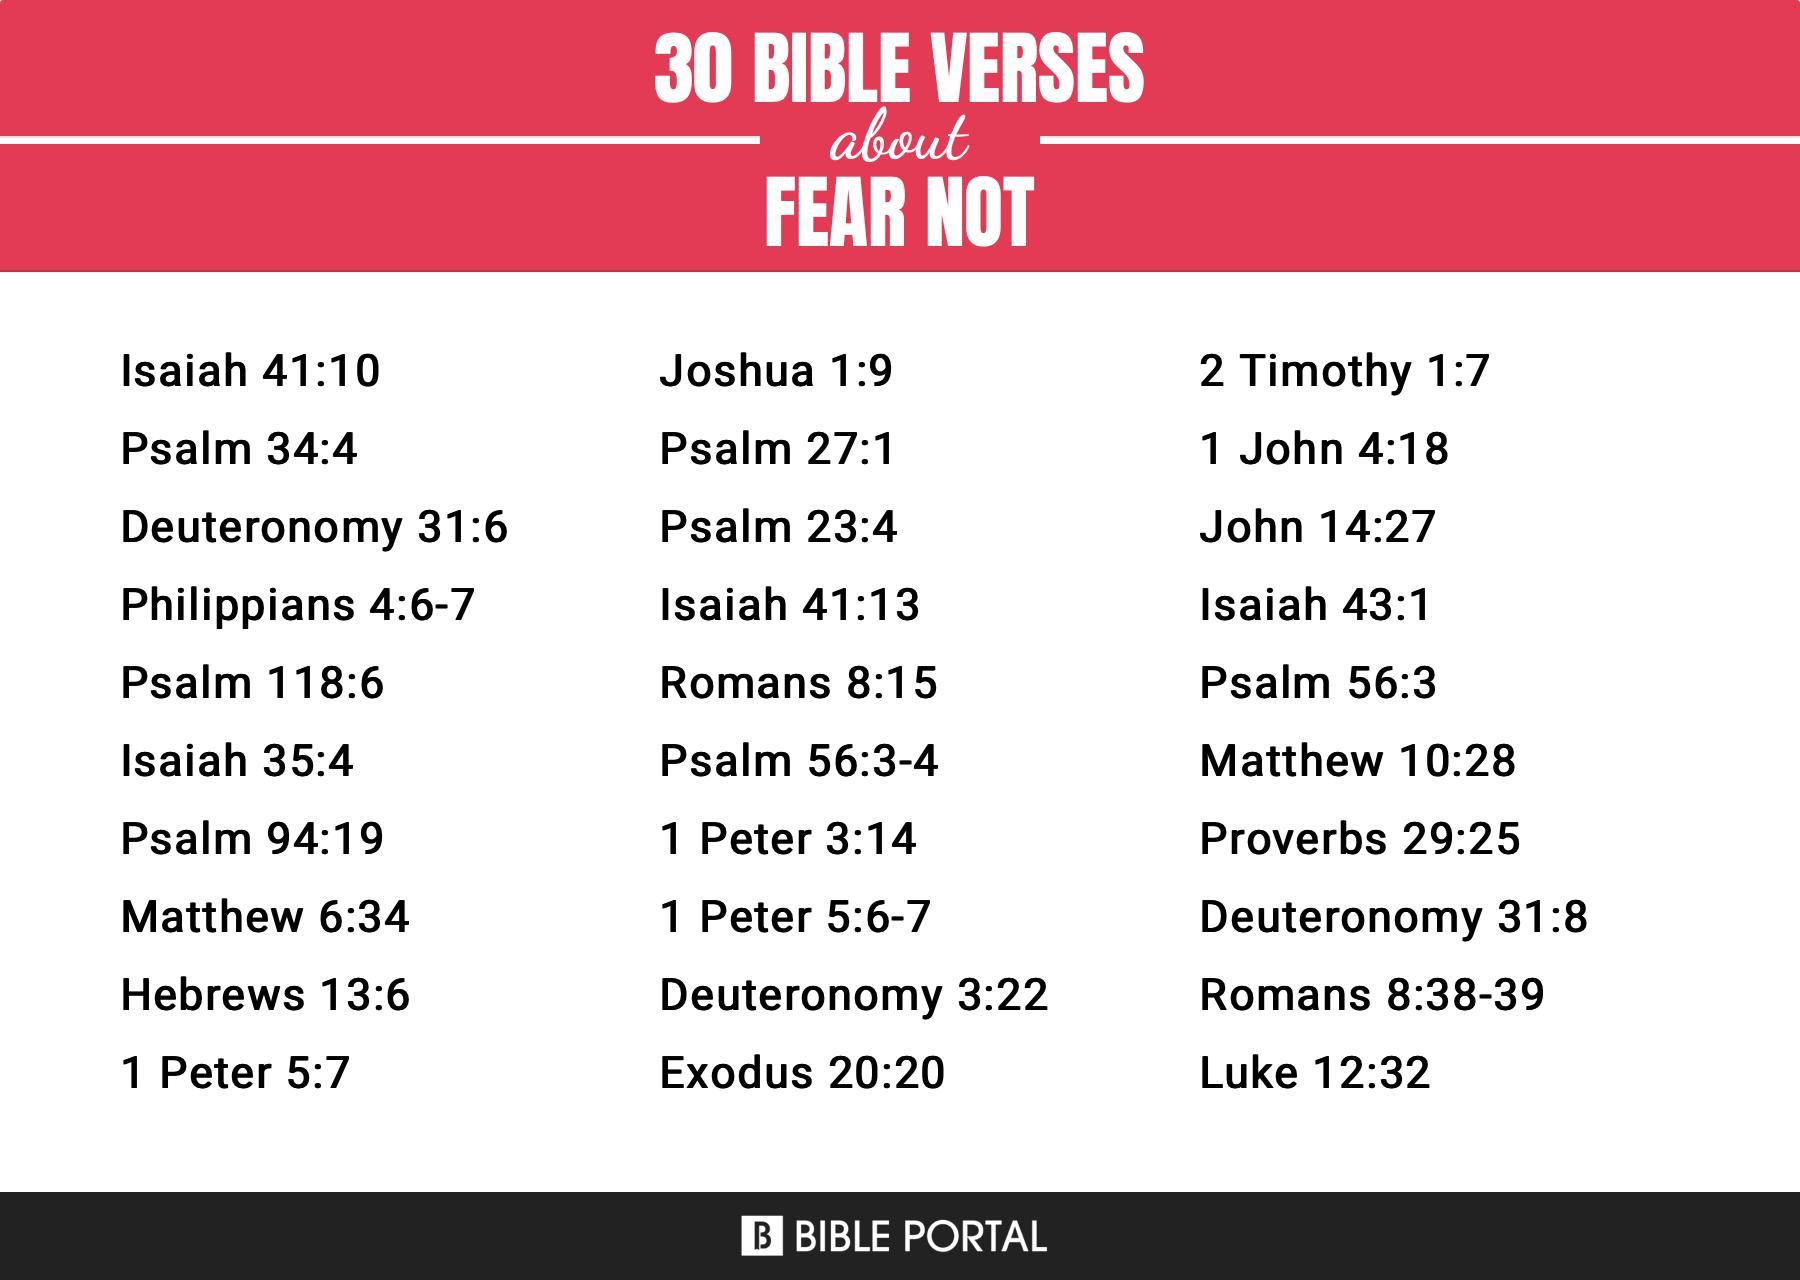 What Does the Bible Say about Fear Not?